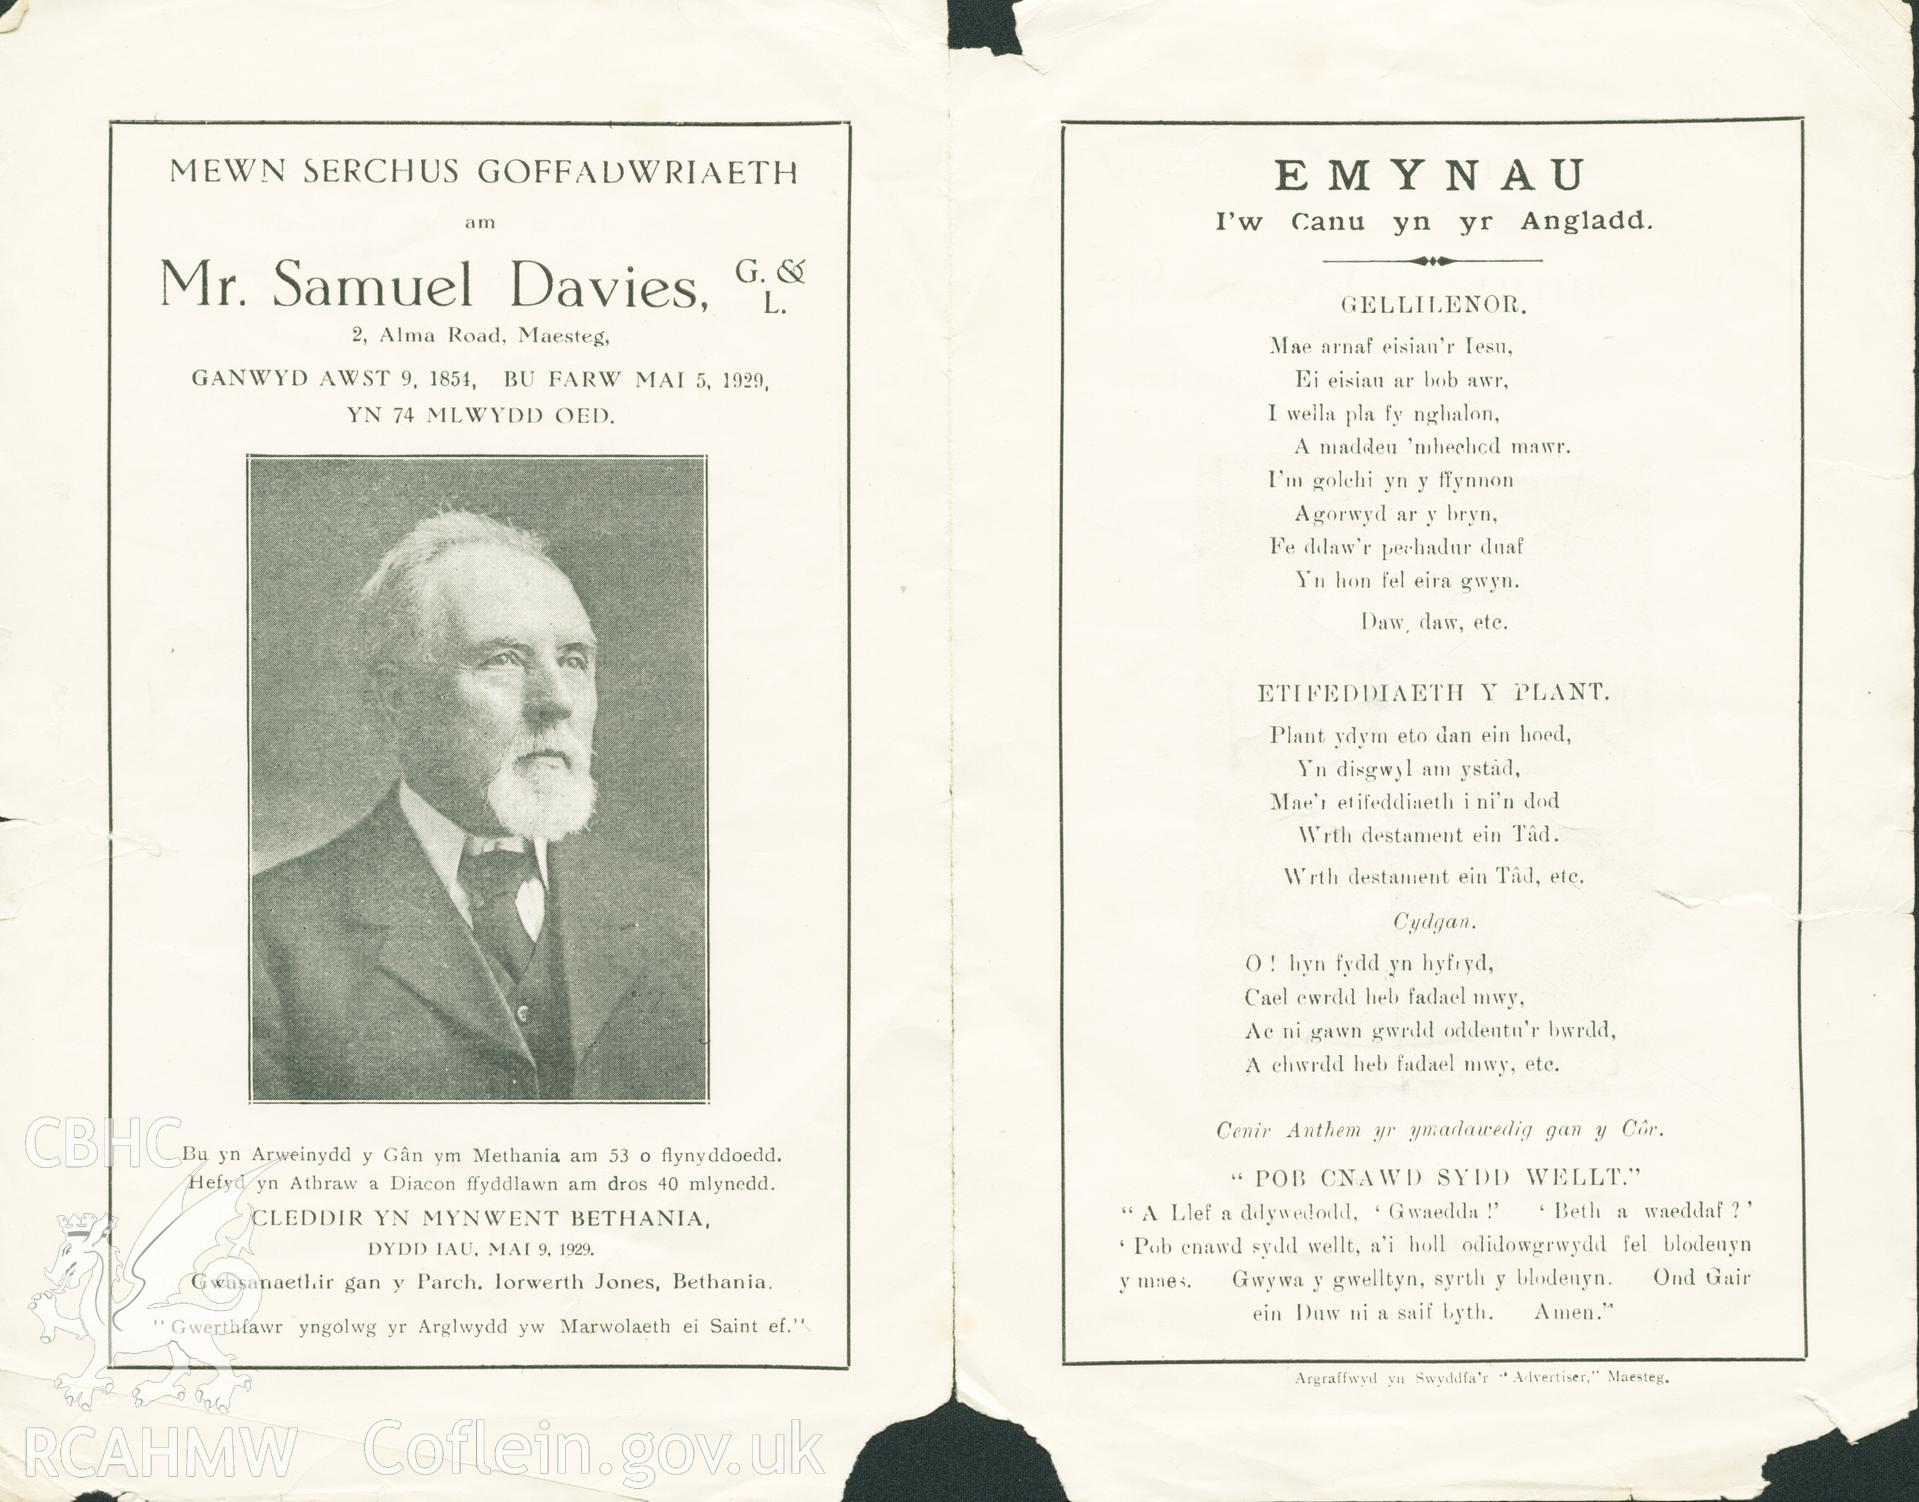 Copy of pamphlet in memory of Samuel Davies, conductor of 50 years, who died in May 1929 whilst the congregation were singing his anthem. Donated to the RCAHMW by Enyd Carroll as part of the Digital Dissent Project.